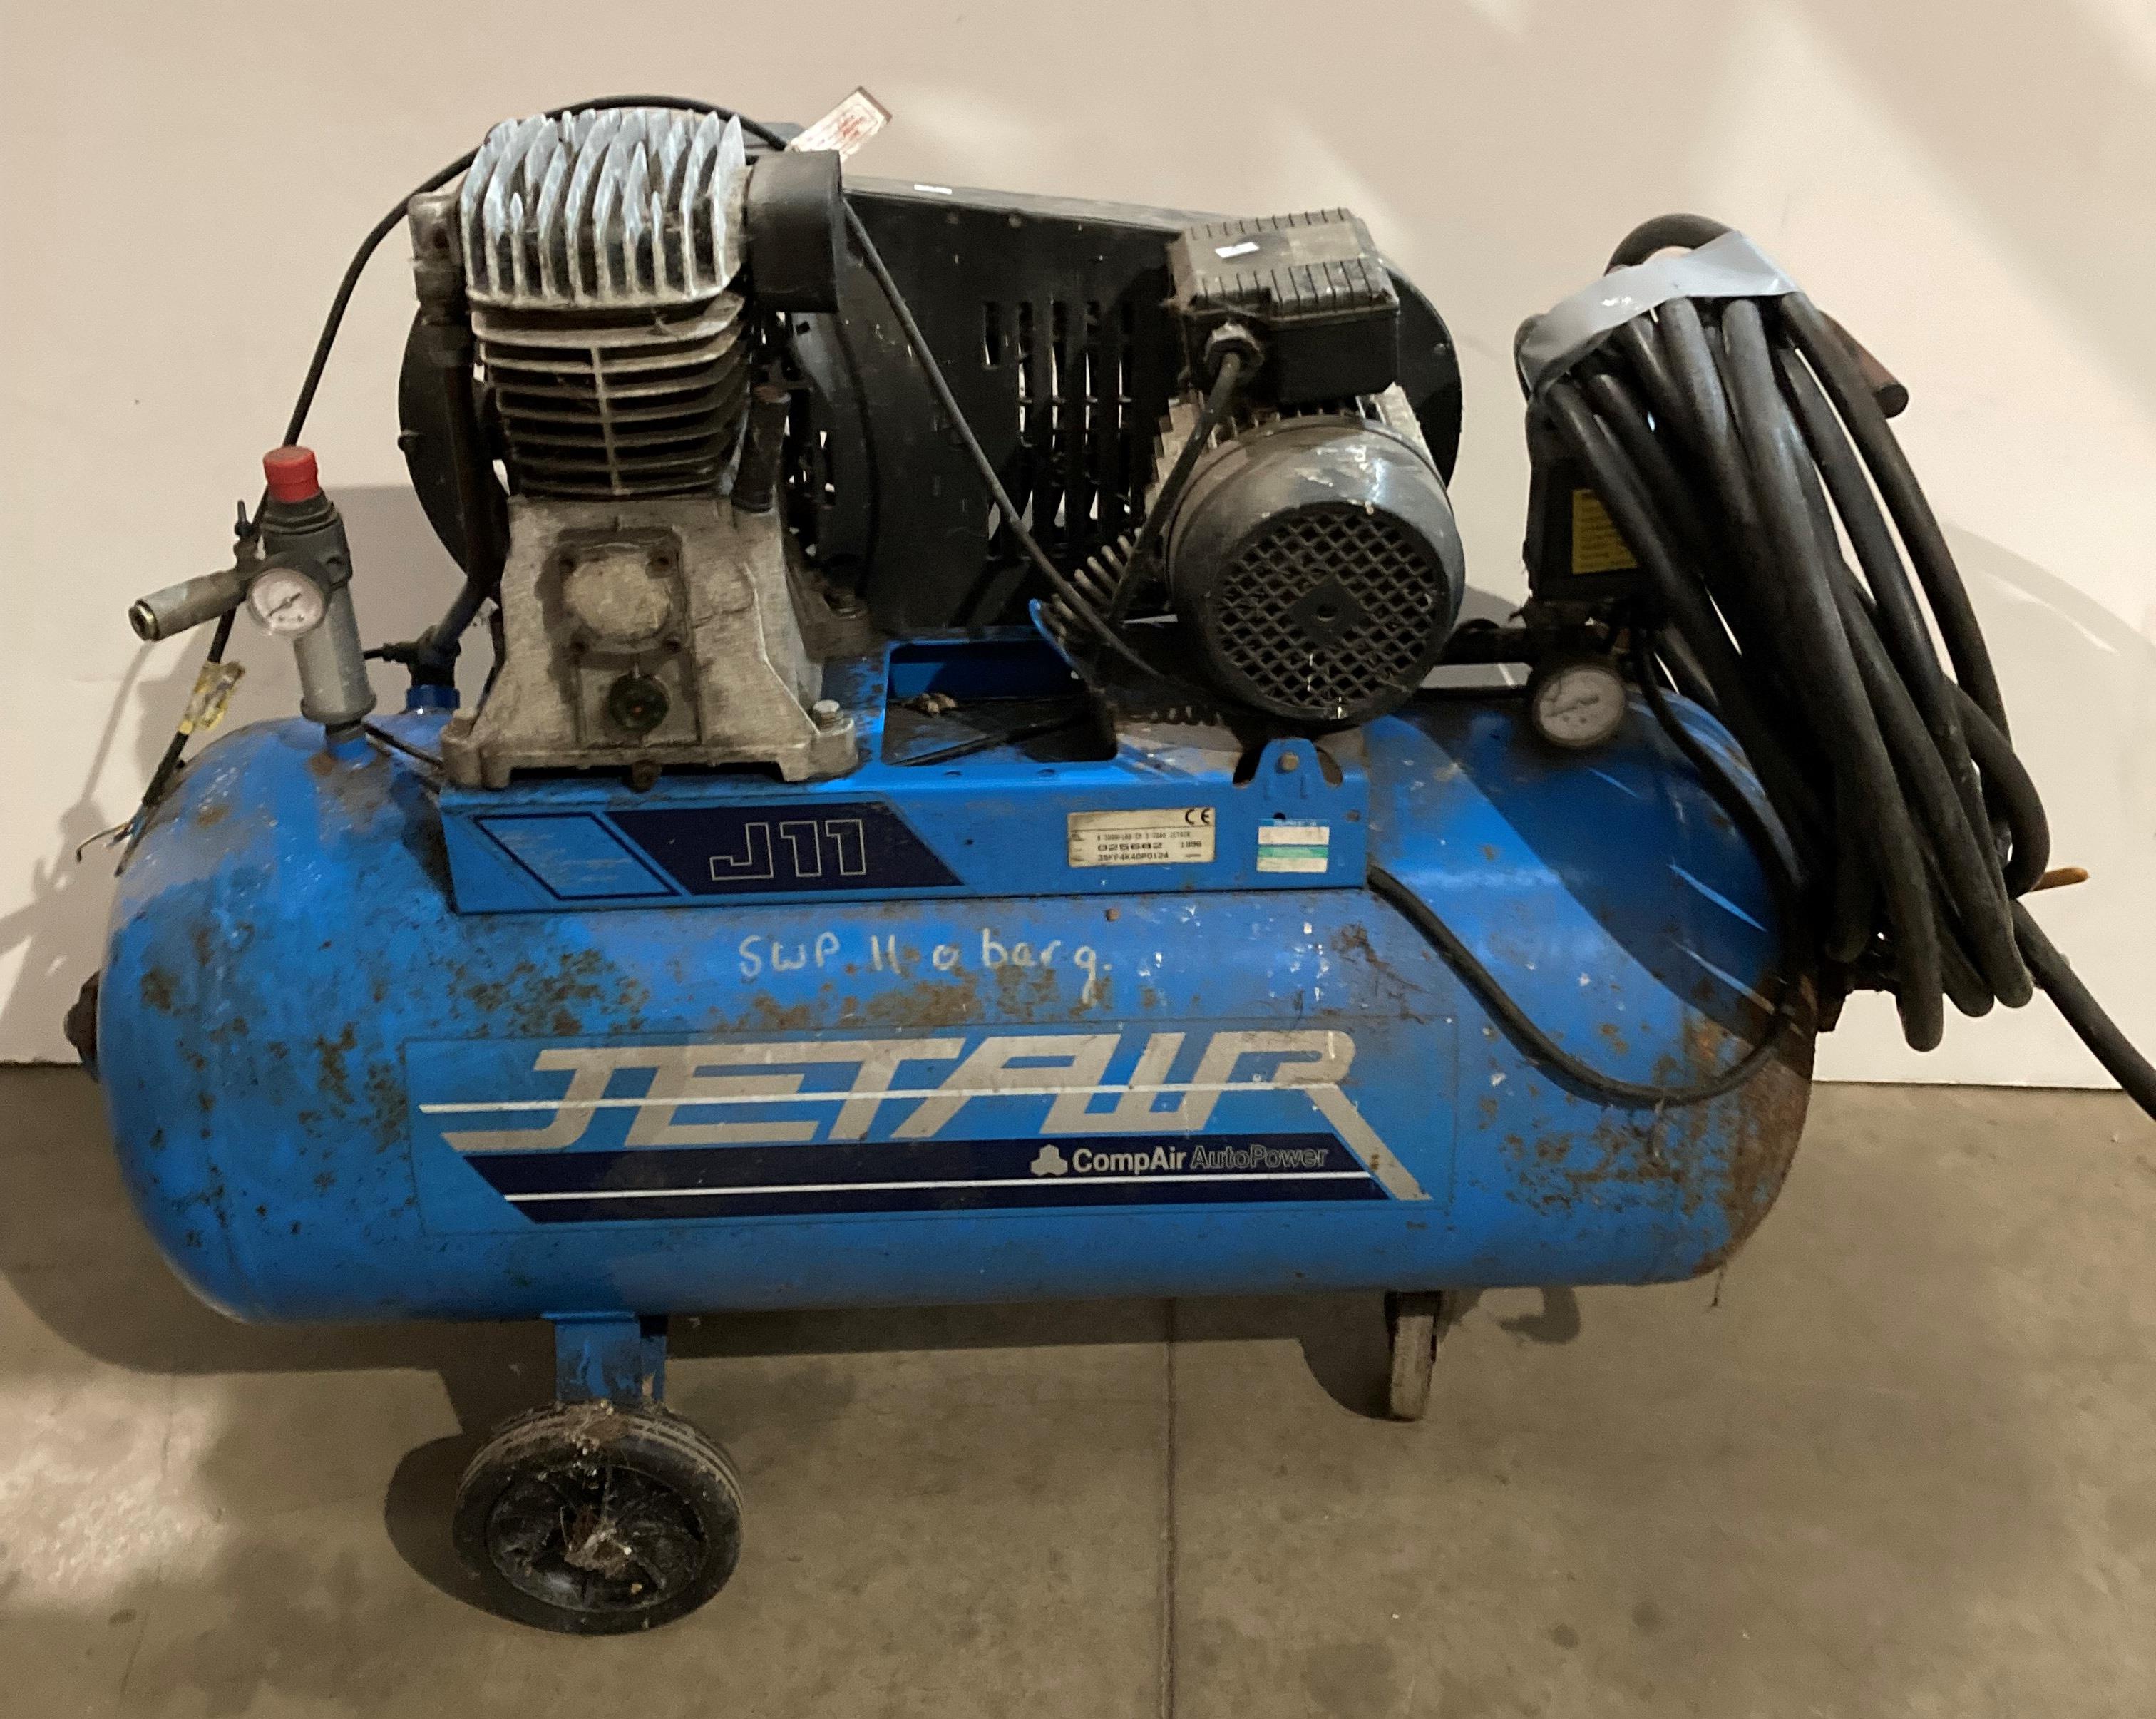 Jetair J11 100L (240v) compressor (no test - should be hard wired) and a length of air hose